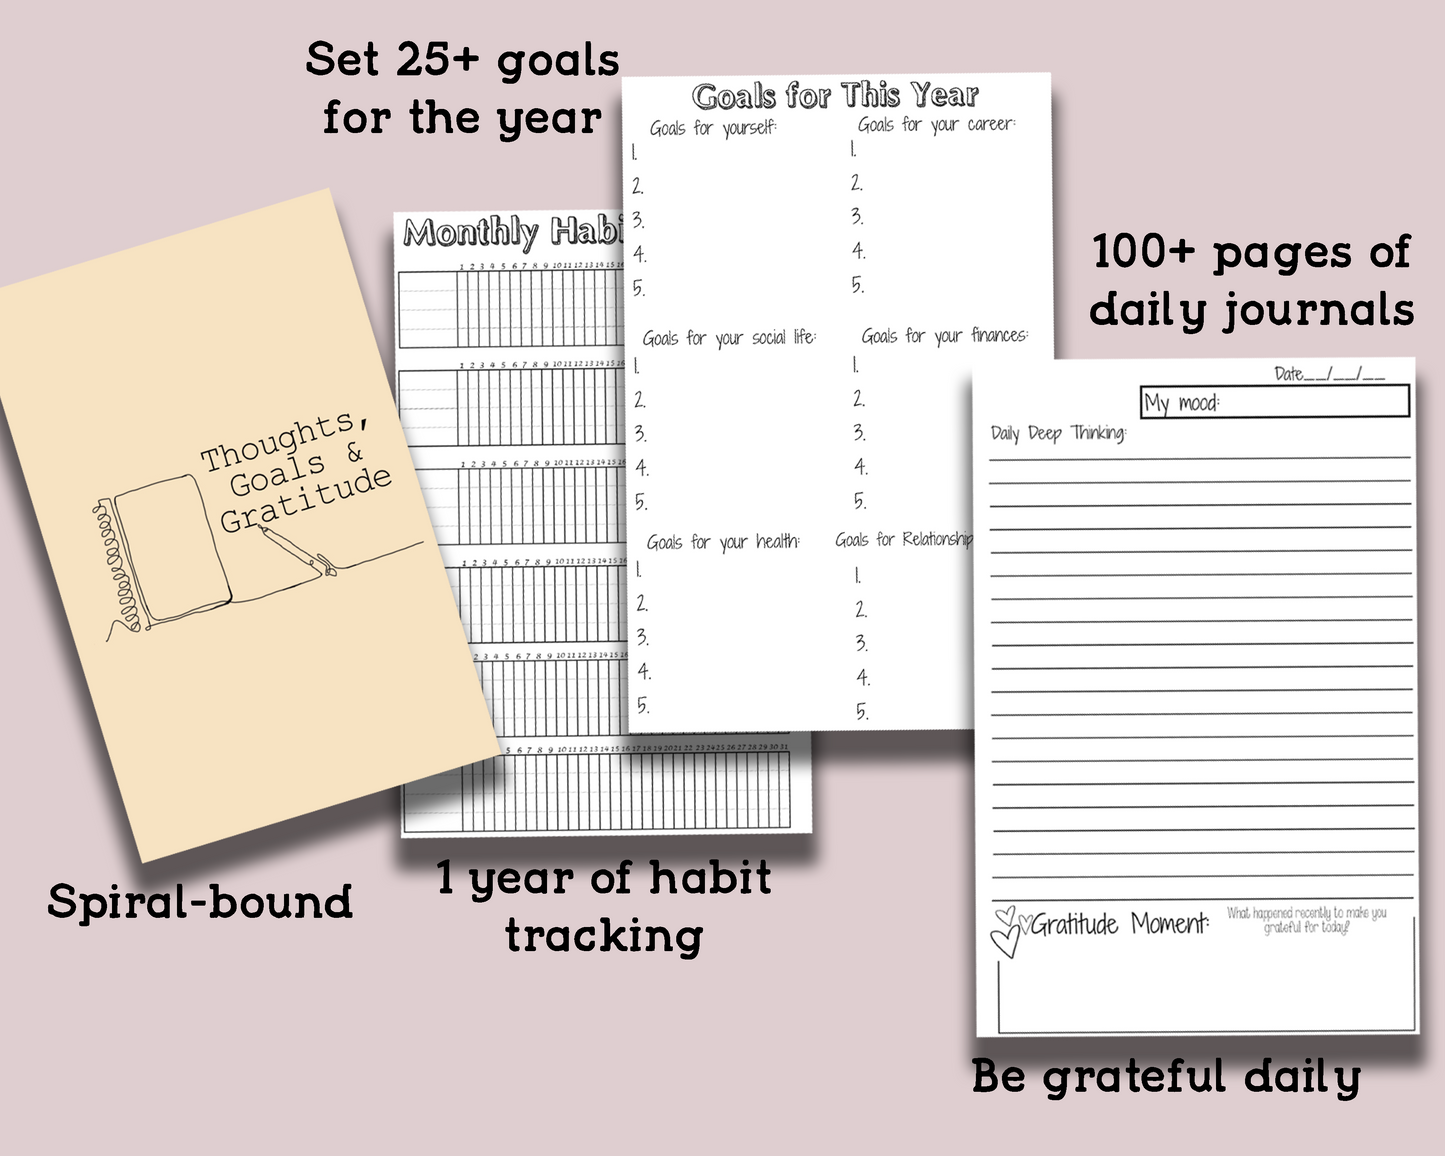 Thoughts, Goals & Gratitude: An Intentional Personal Growth Journal